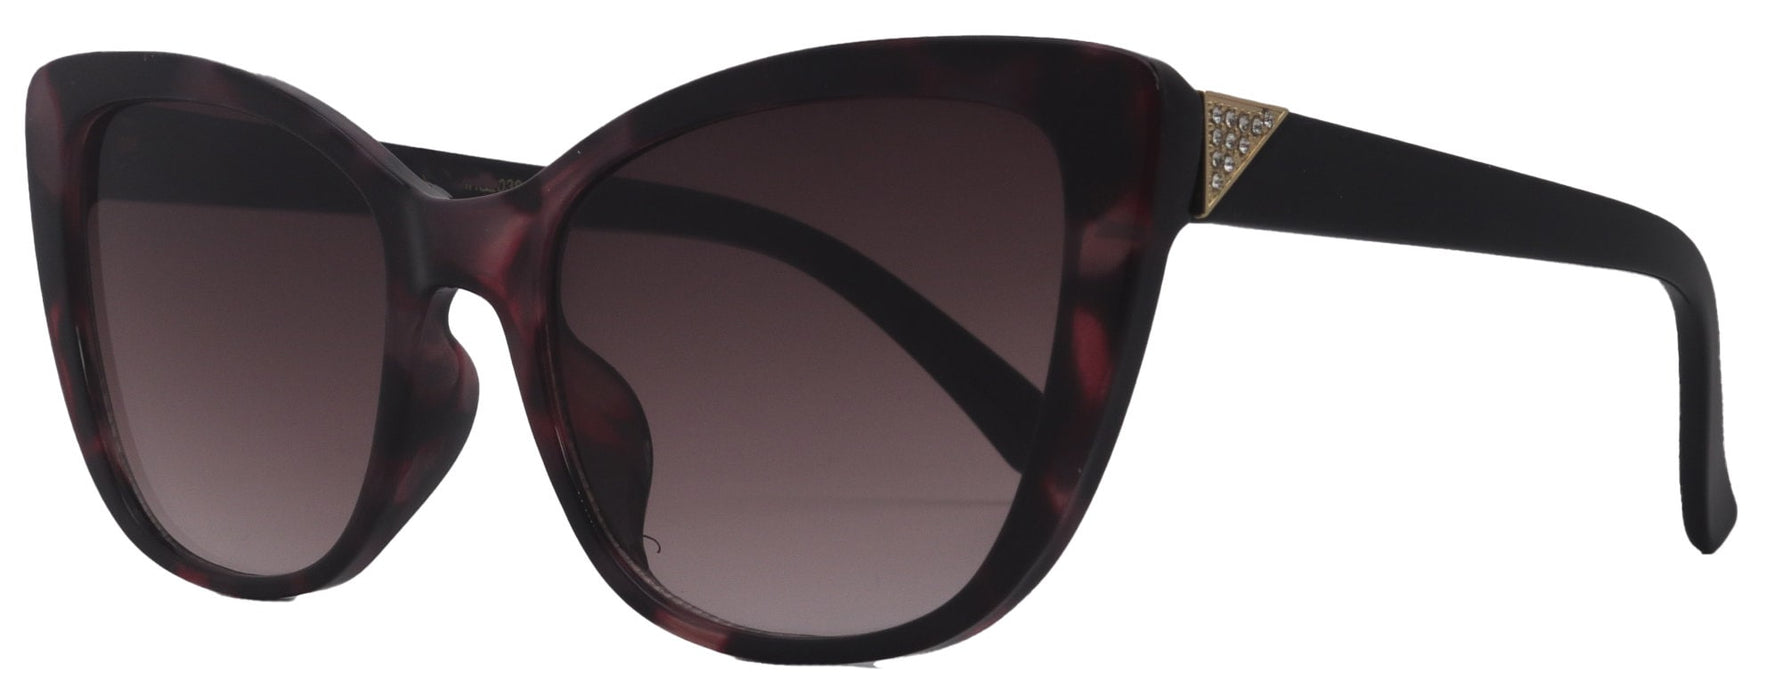 Parisian Fashion High End Line Bifocal OR Non-Bifocal Sun Reading Glasses Inspired by NY Fifth Avenue